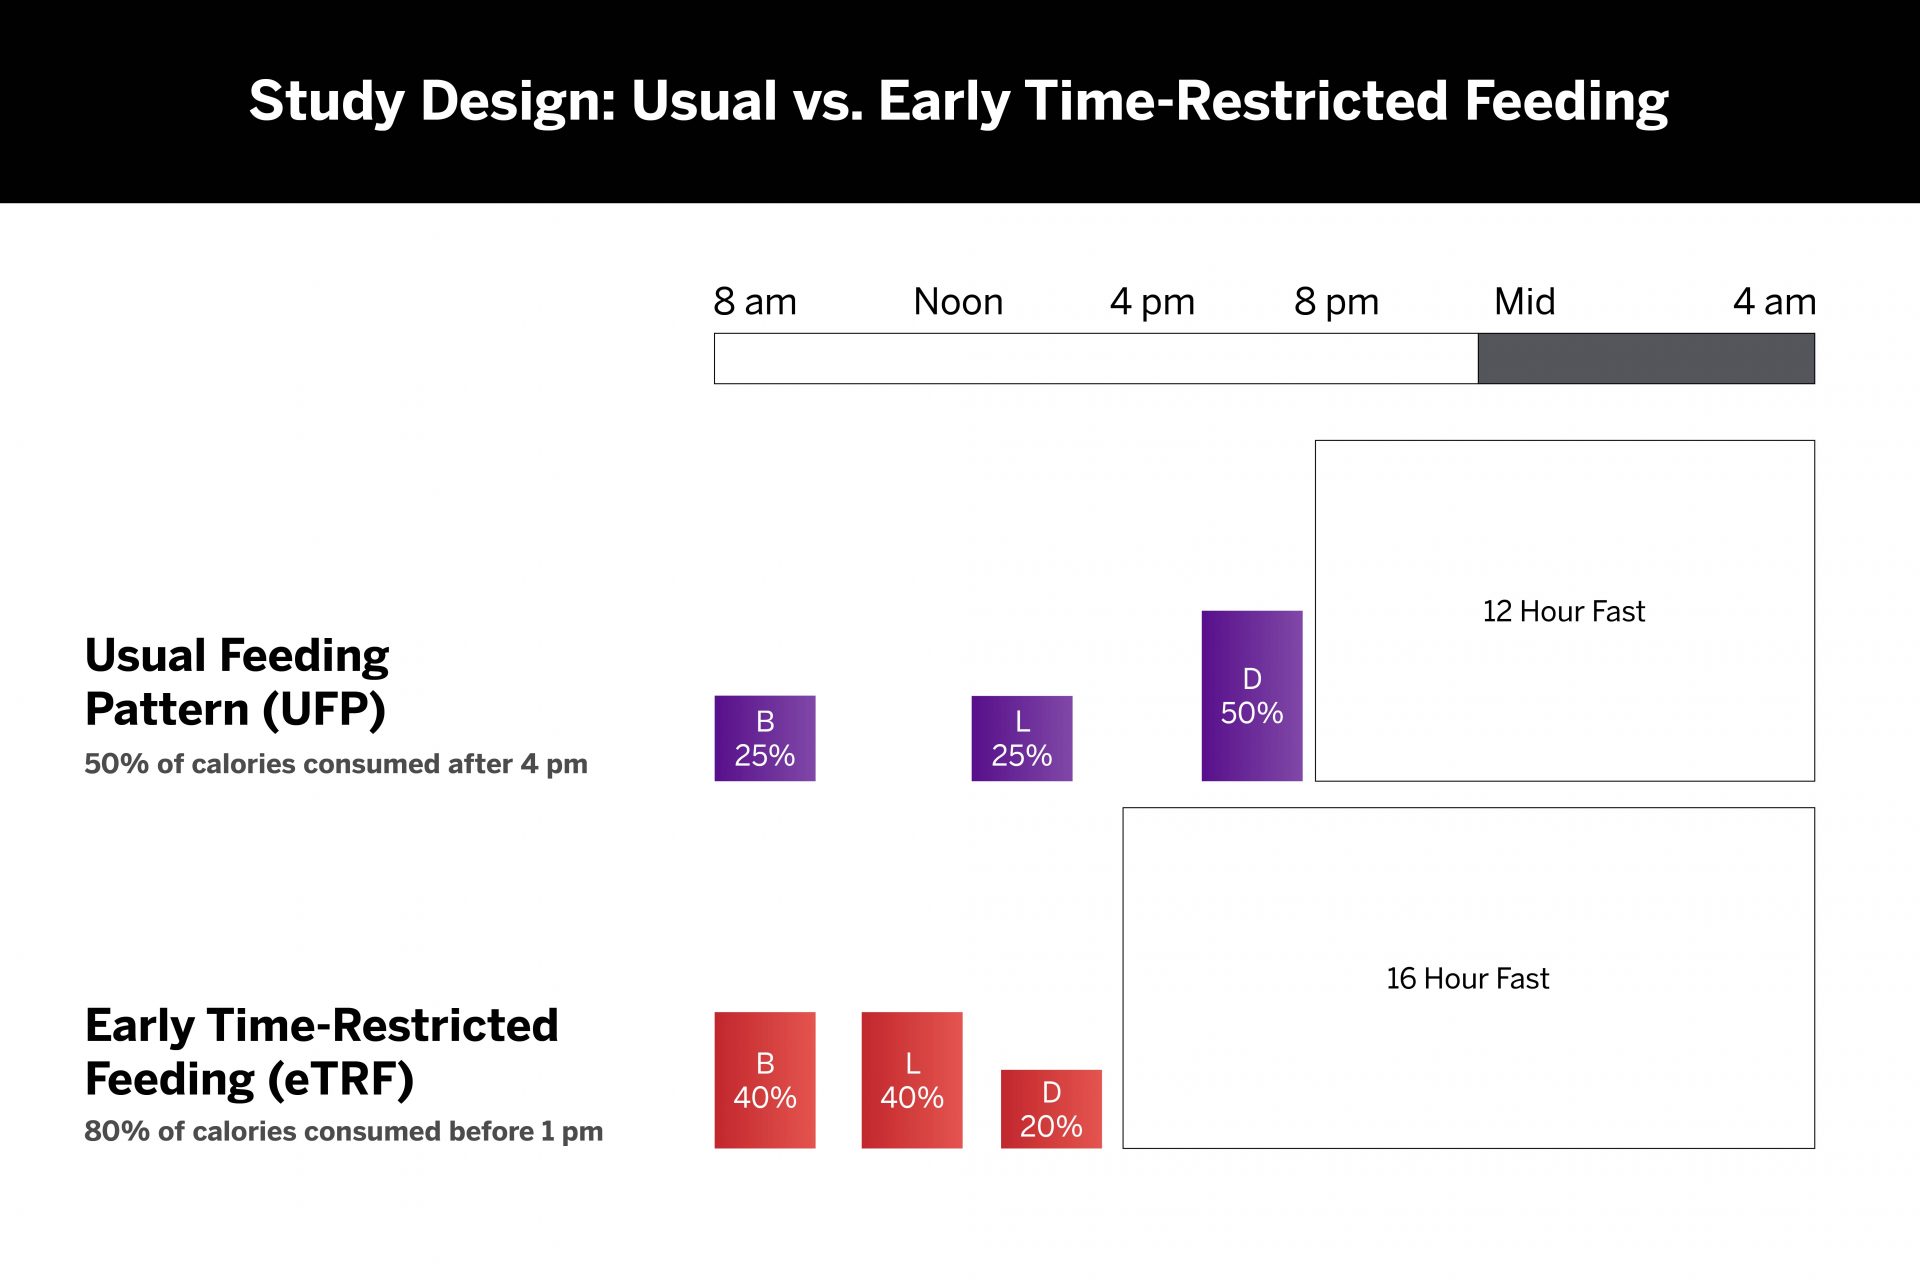 In the usual feeding pattern (UFP), 50 percent of calories are consumed after 4 pm. In contrast, early time-restricted feeding (eTRF) is a form of intermittent fasting in which 80 percent of calories are consumed before 1 pm.